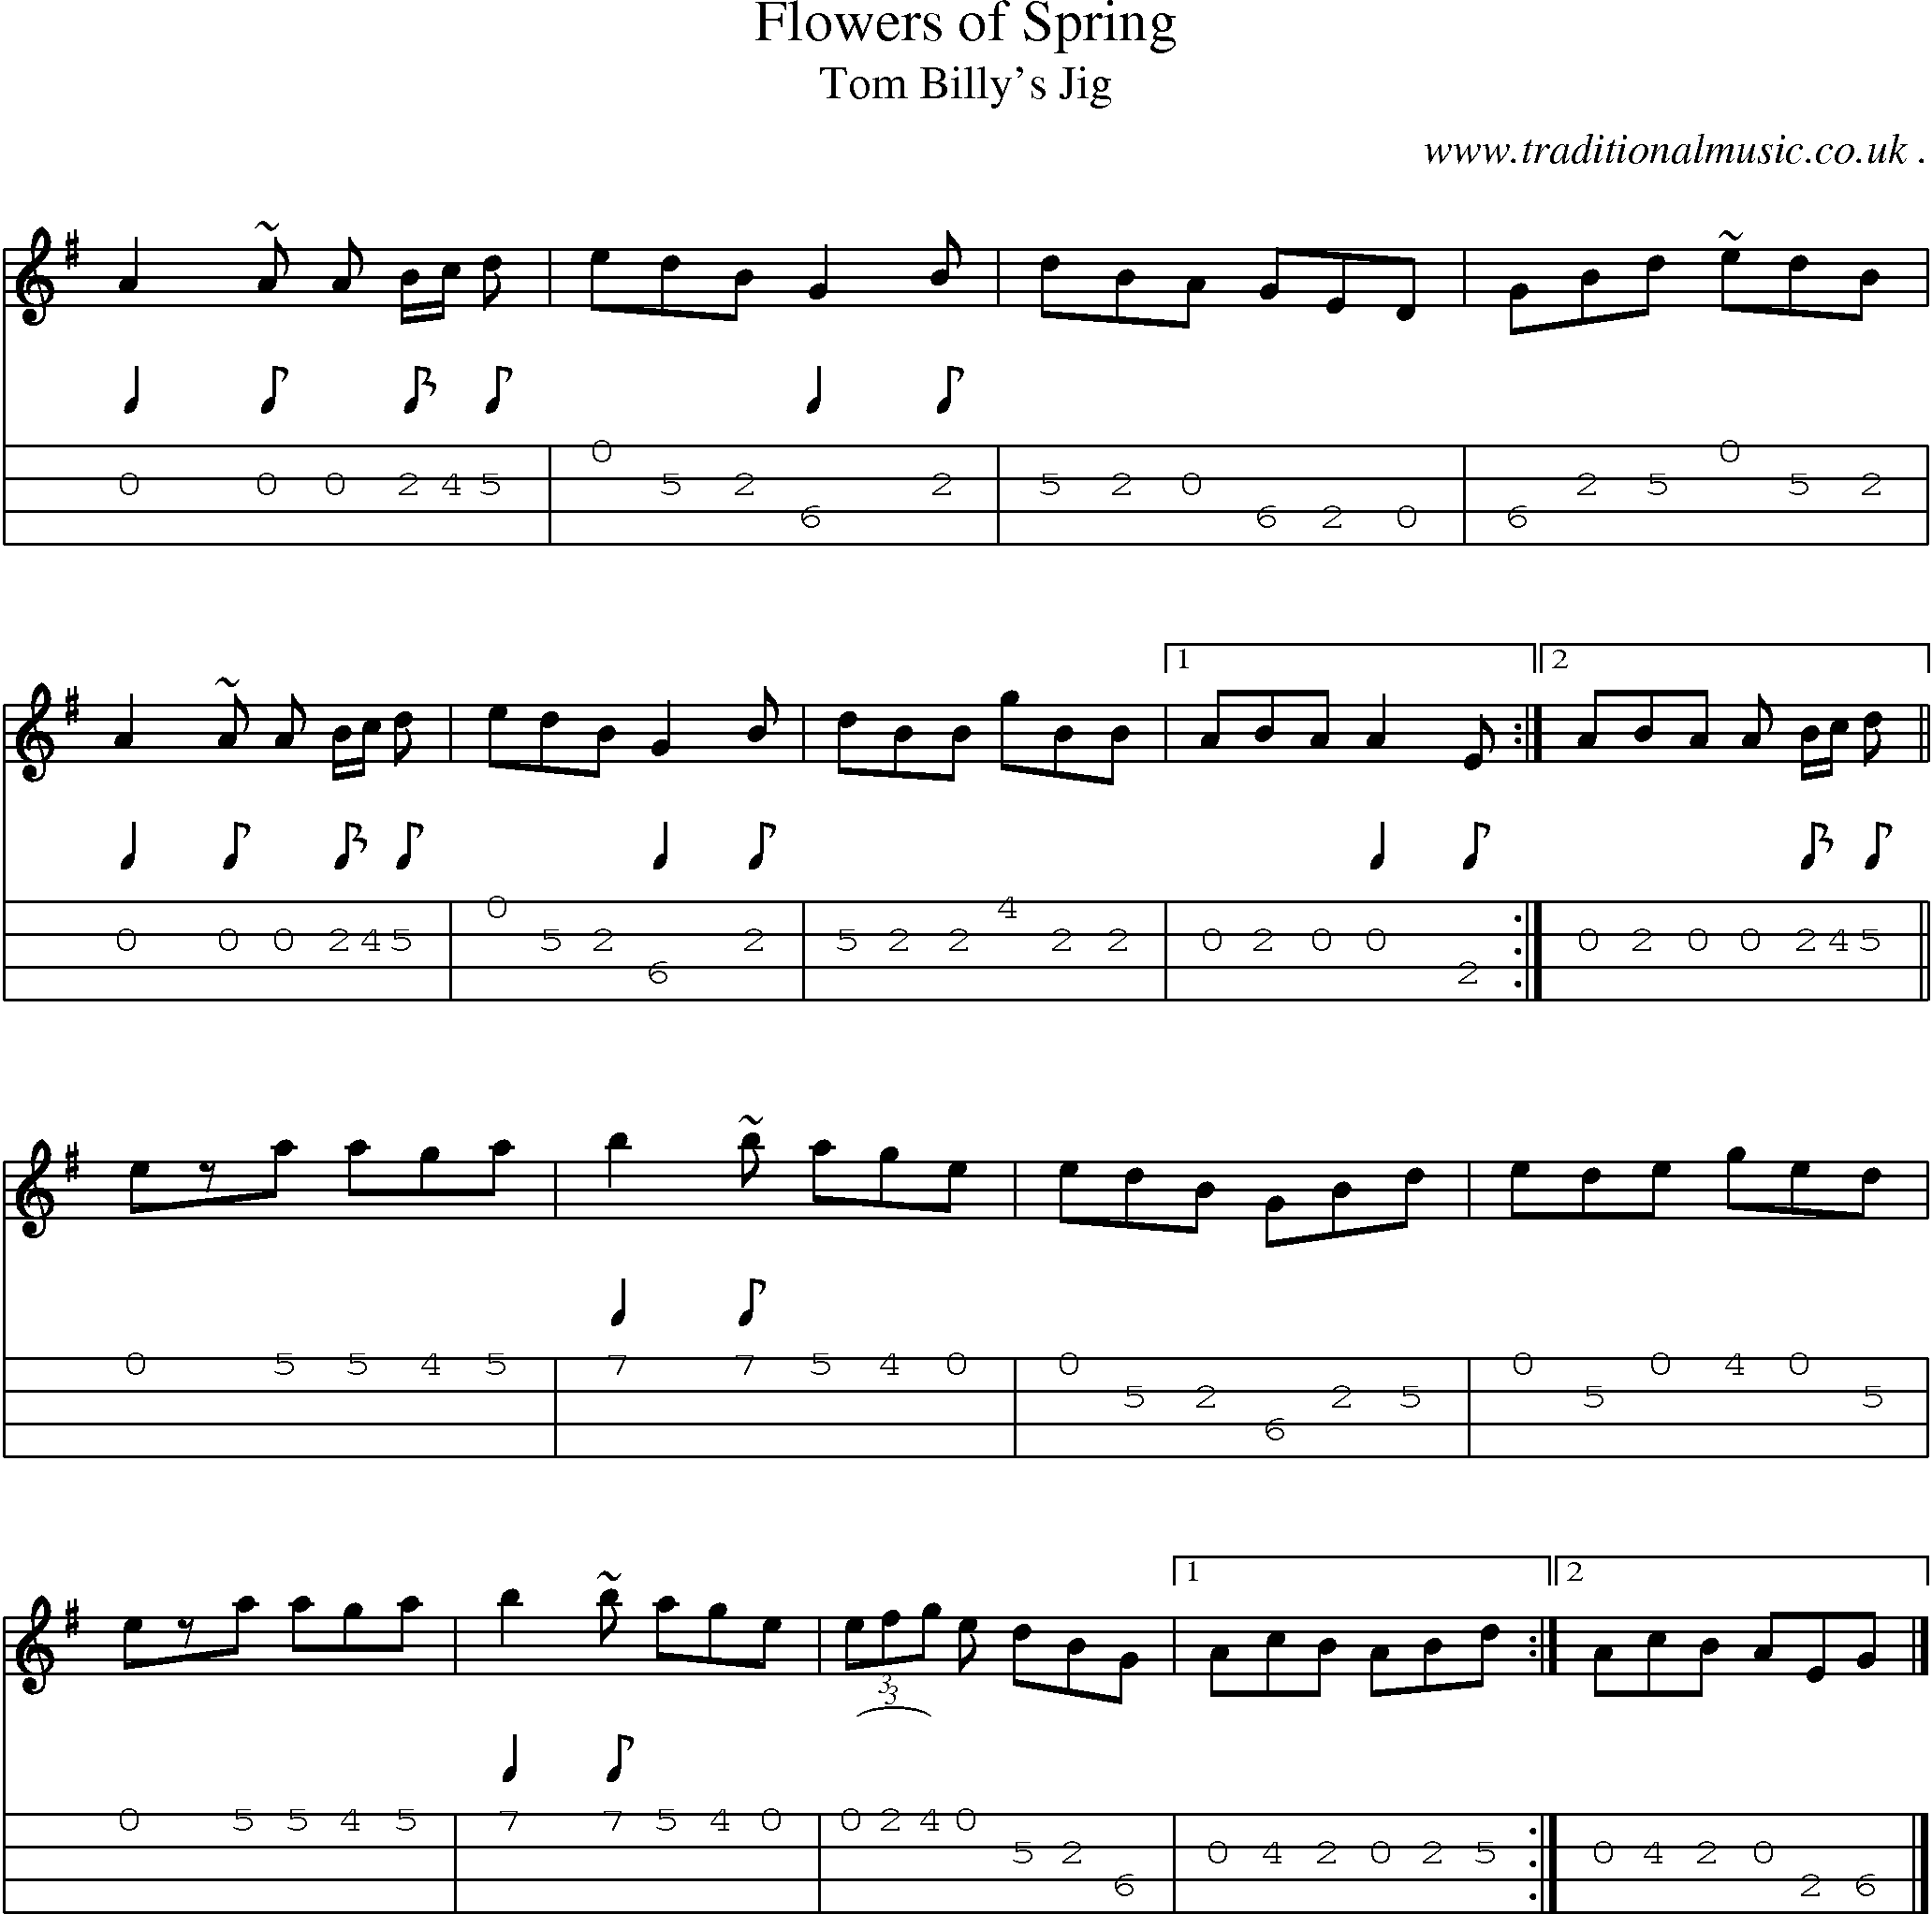 Sheet-music  score, Chords and Mandolin Tabs for Flowers Of Spring